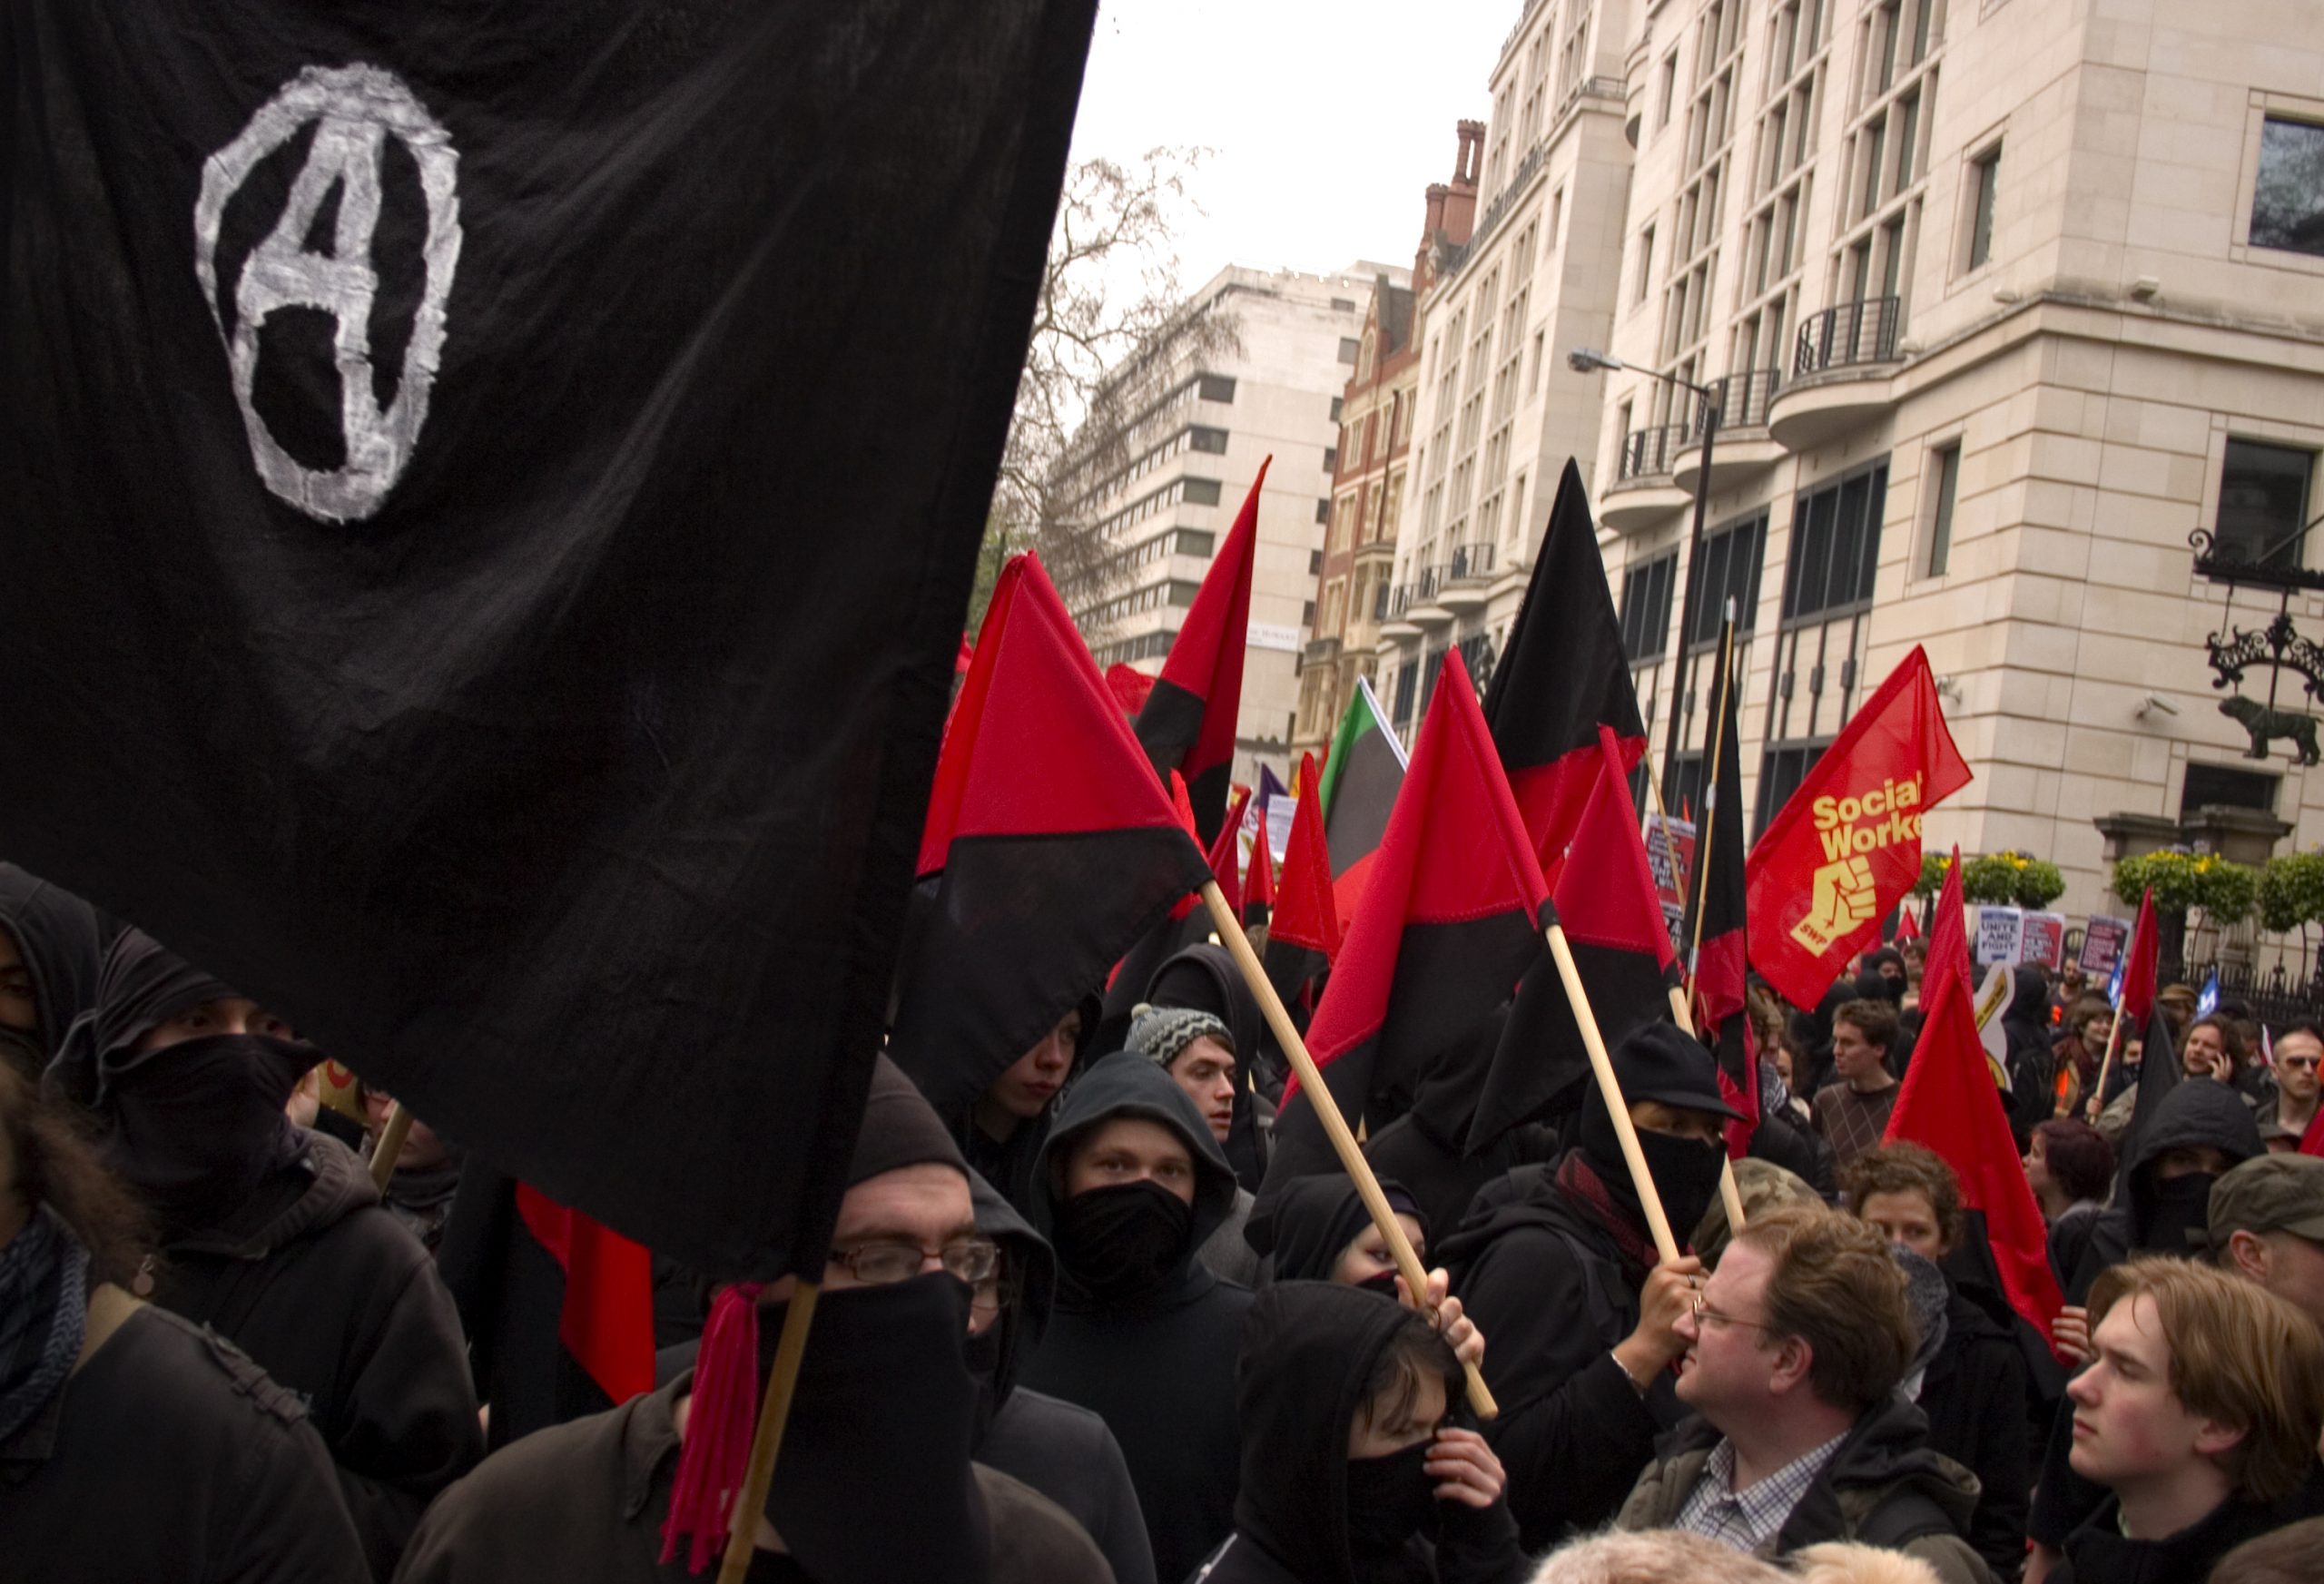 Protest featuring anarchist and socialist flags.